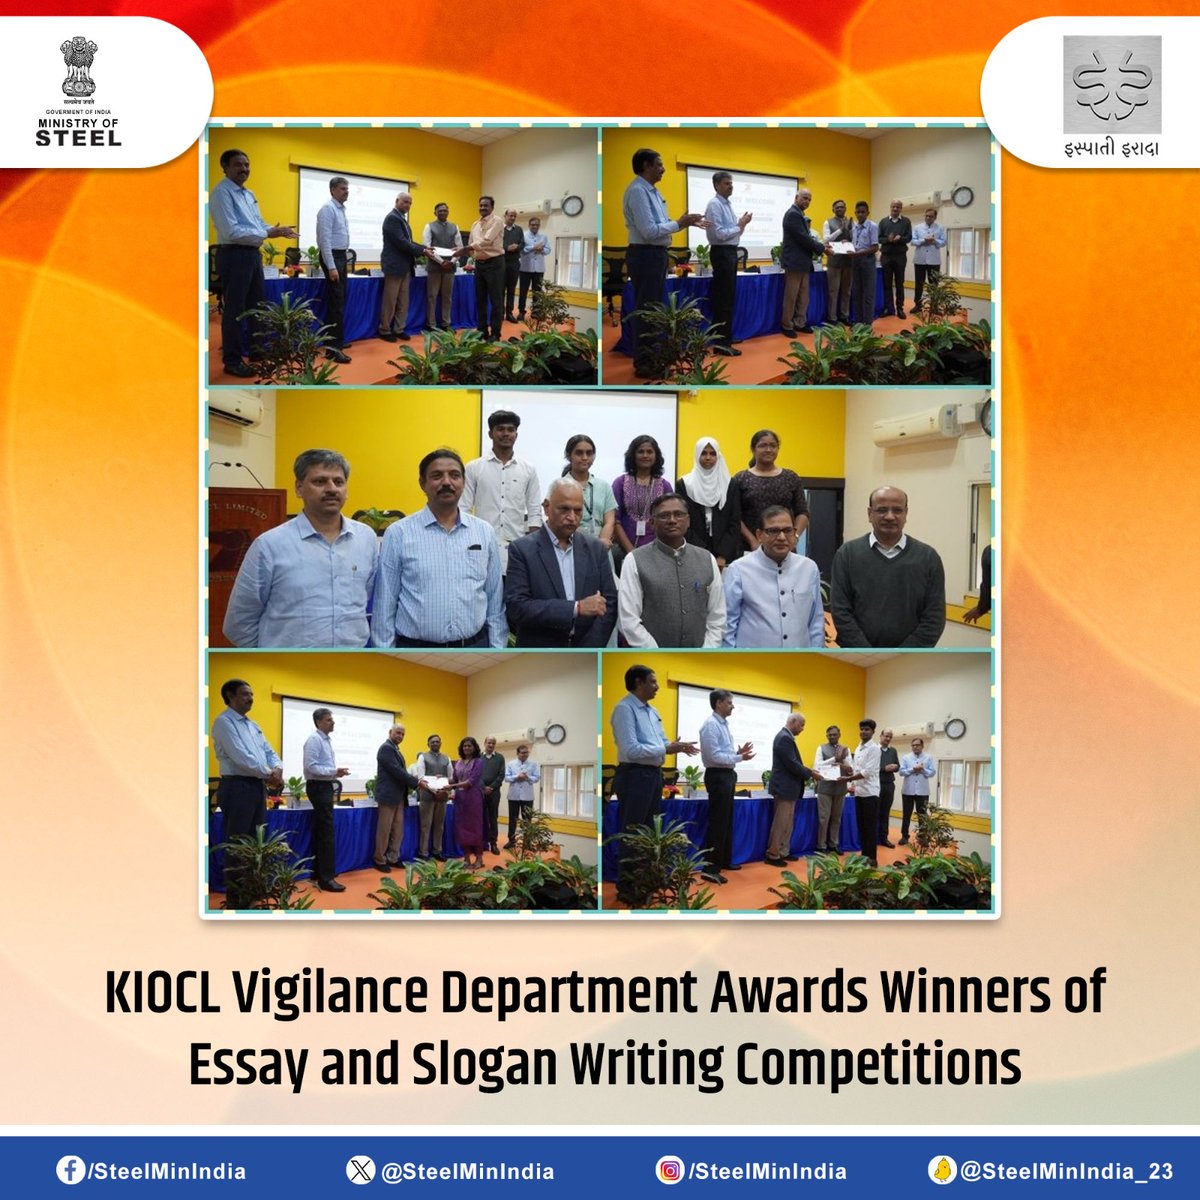 #KIOCL's #VigilanceDepartment honors winners of Essay and Slogan Writing Competitions among employees, and students from schools, and colleges. 🏆📝

#KIOCL #WritingCompetition